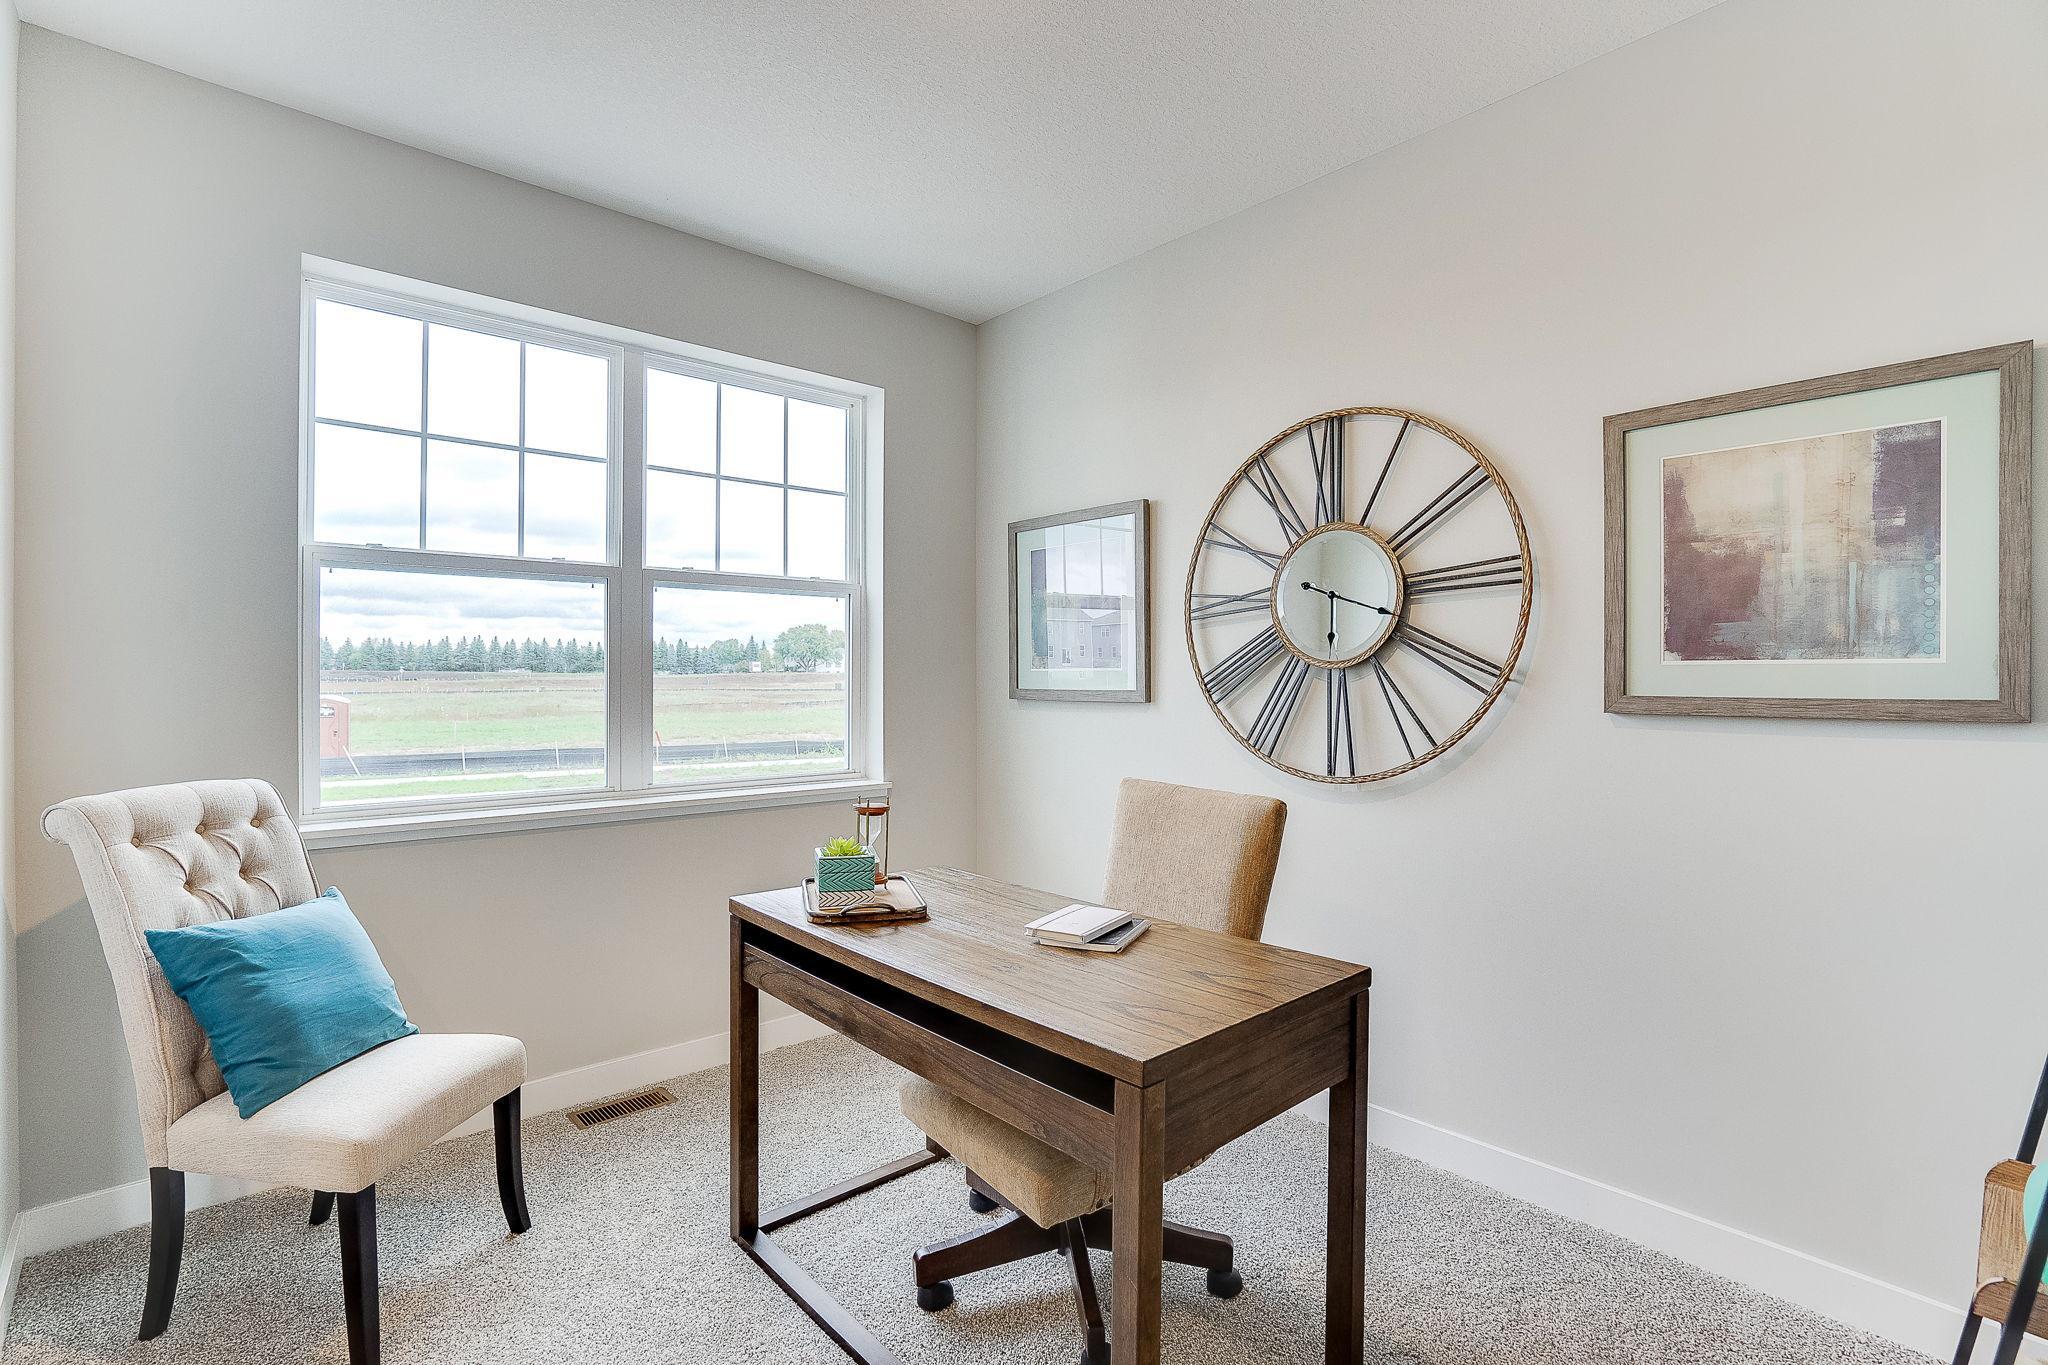 At the front of the home, this flex room provides you with options - office, den, exercise room...its all up to you! (Model home, colors will vary)